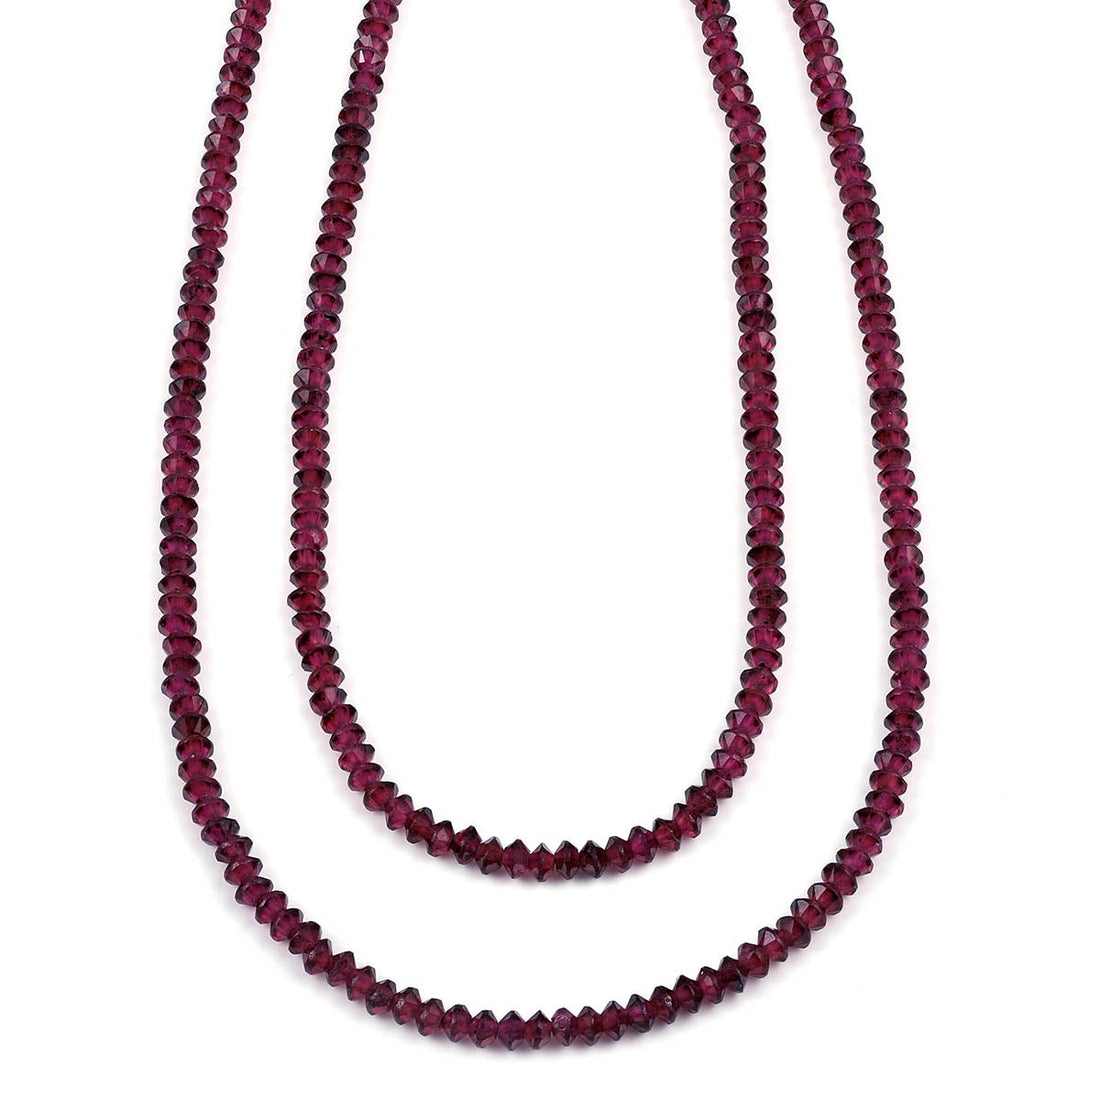 Garnet Beads Layered Silver Necklace